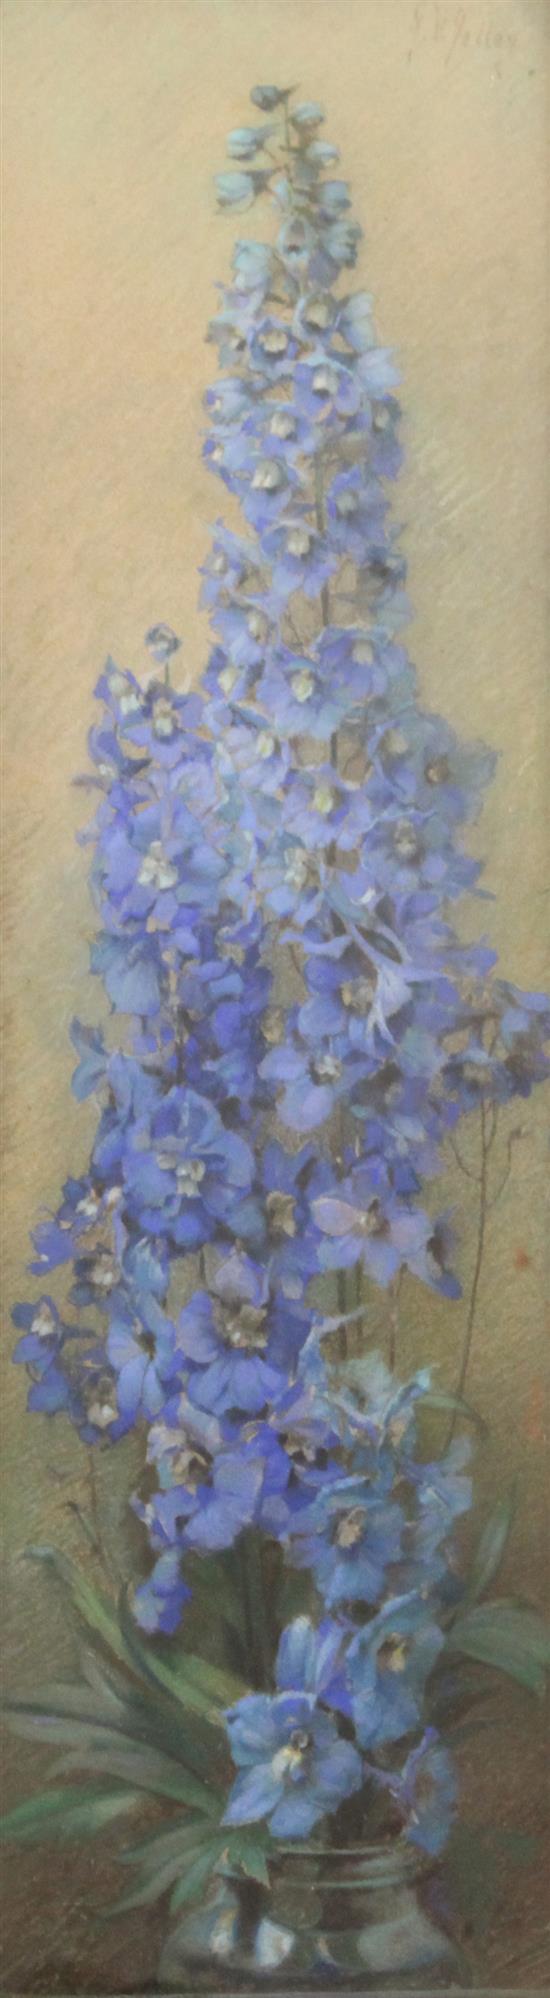 James Valentine Jelley (1885-1942) Study of Delphiniums in a vase 20.25 x 6.25in.